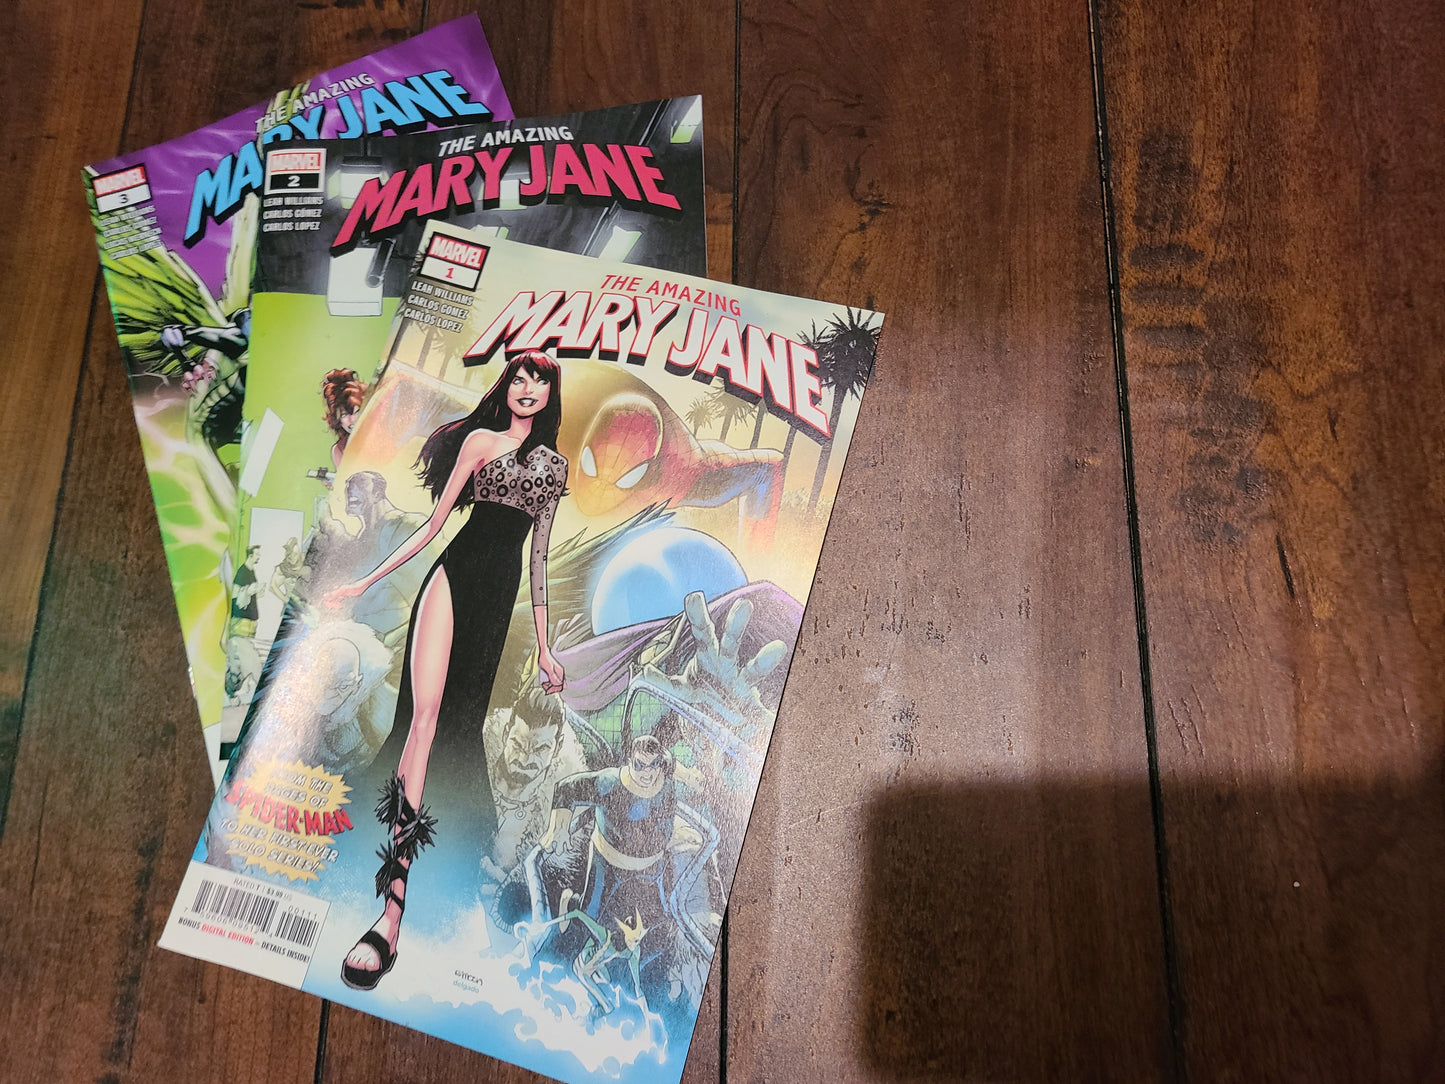 Perky Nerd Mary Jane Comic Bundle - First 3 issues of The Amazing Mary Jane